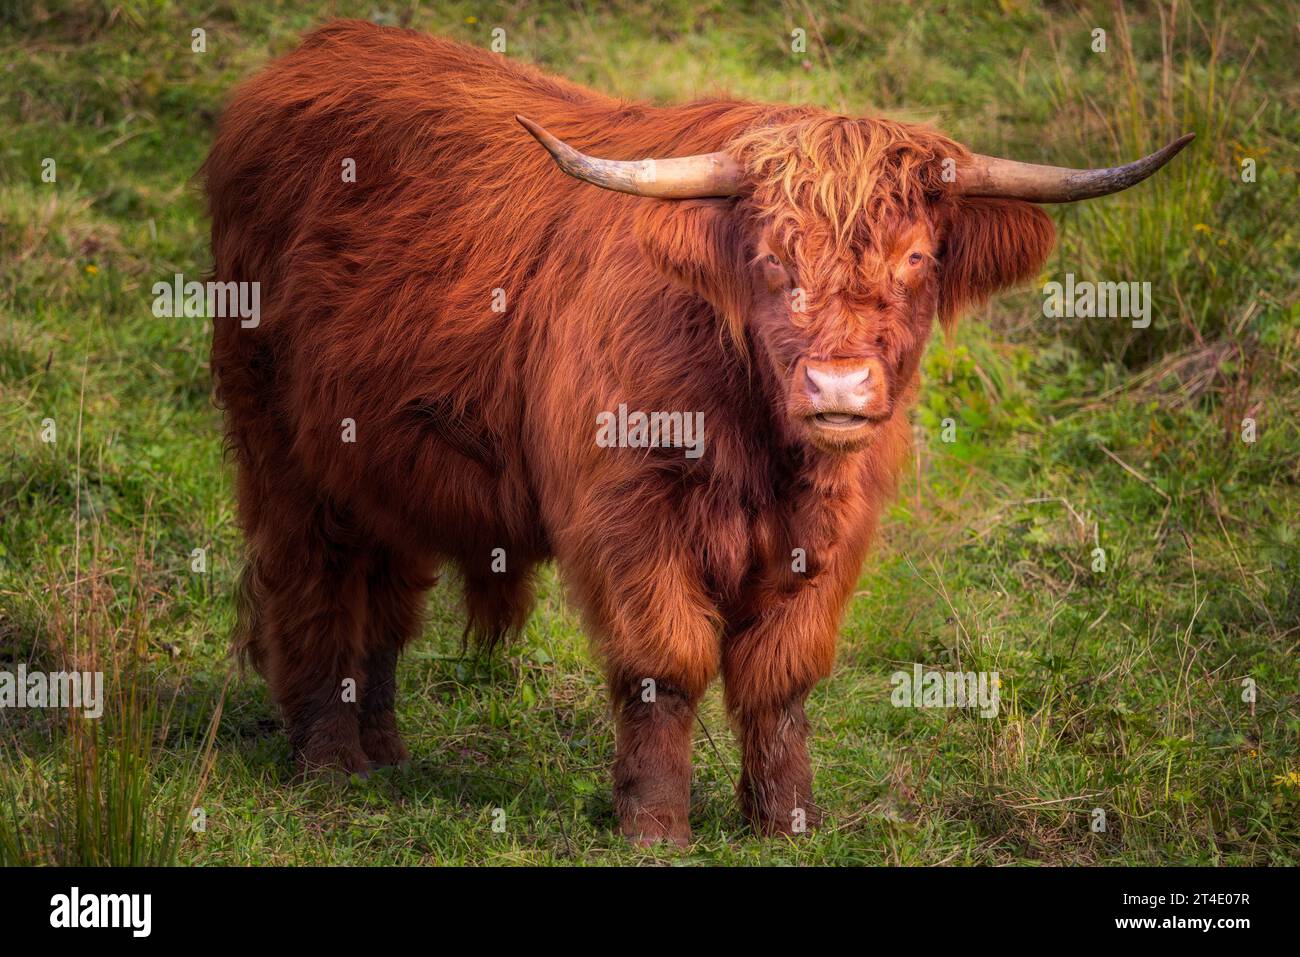 HIghland Cattle VT -  This rustic cattle is a Scottish breed able to sustain the cold temperatures during the winter months in Vermont. Stock Photo